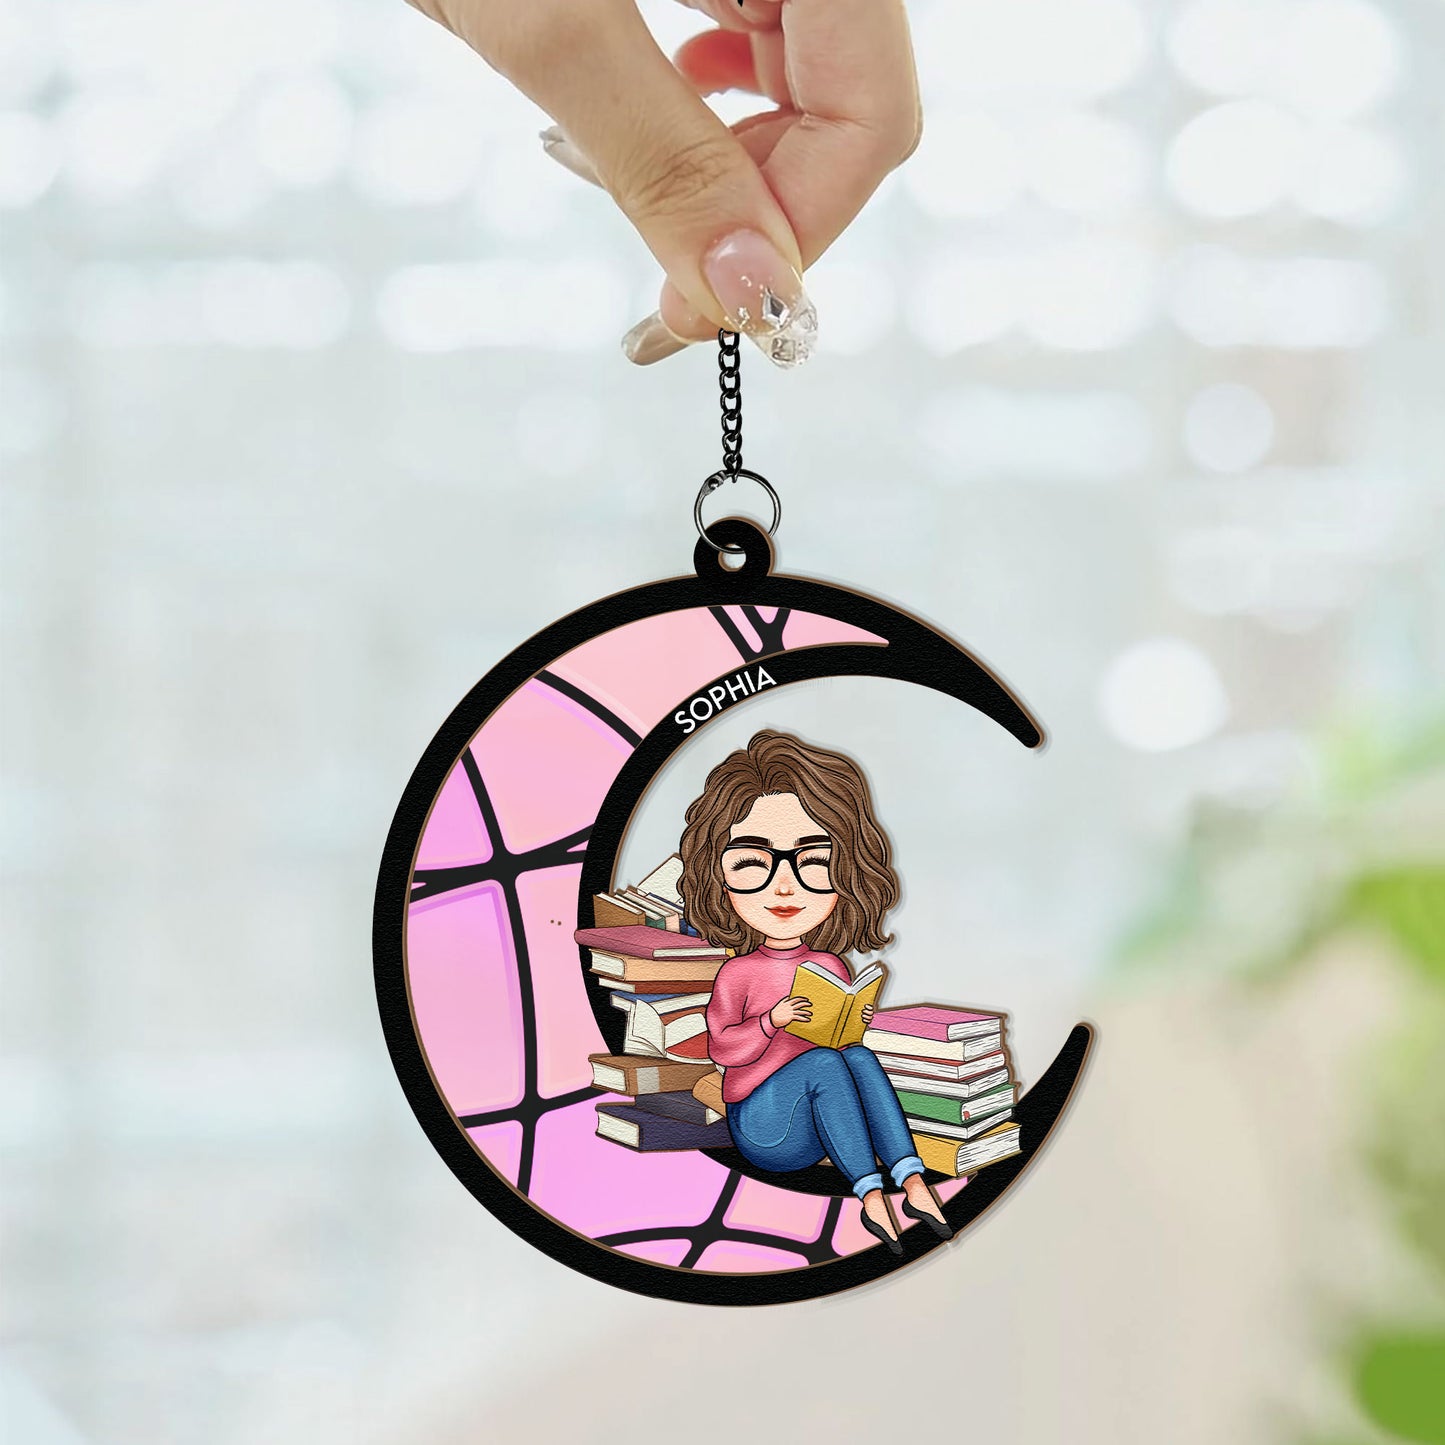 Reading On The Moon - Personalized Window Hanging Suncatcher Ornament